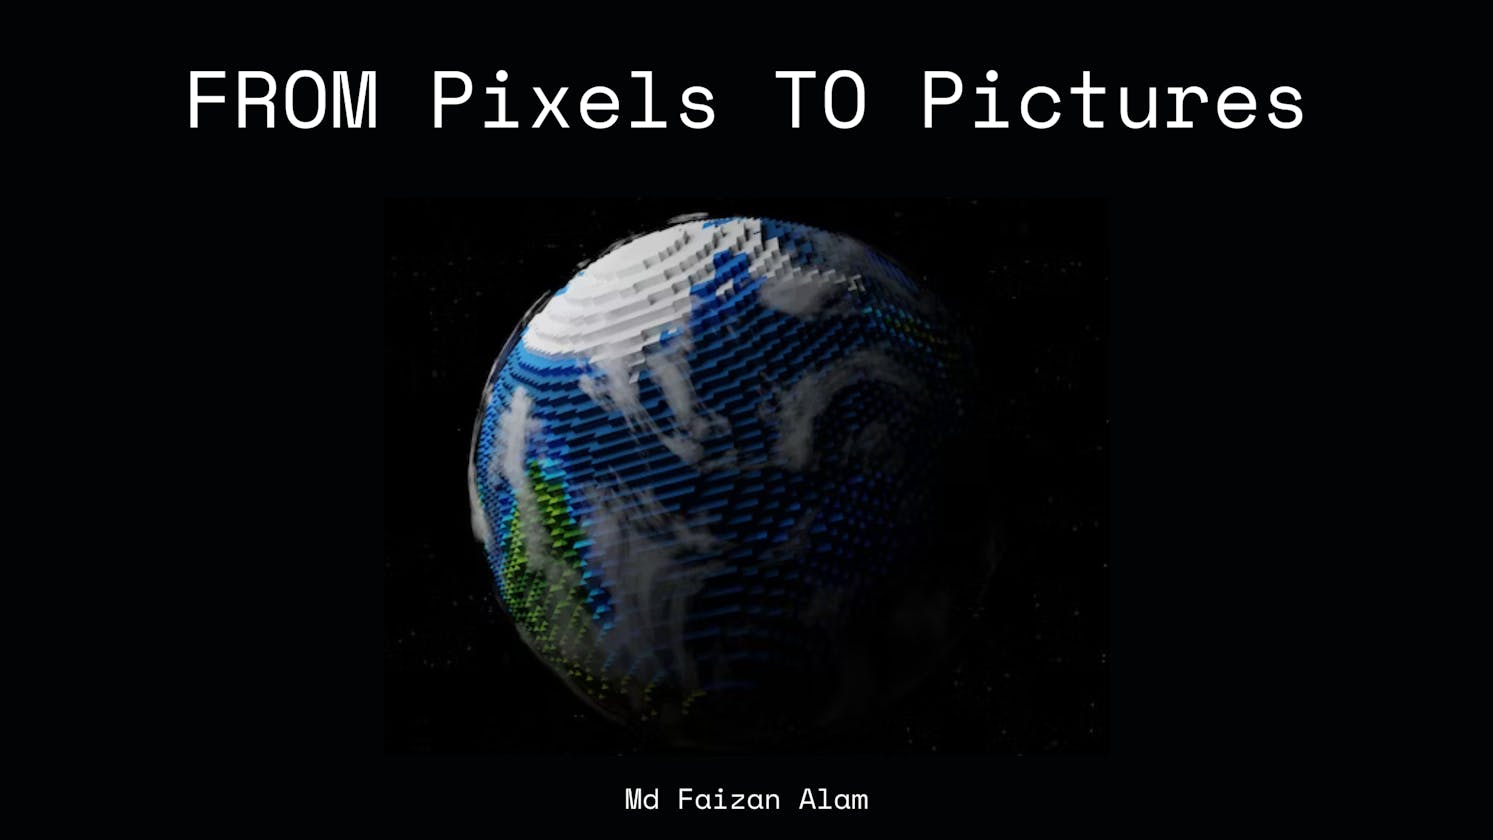 From Pixels to Pictures